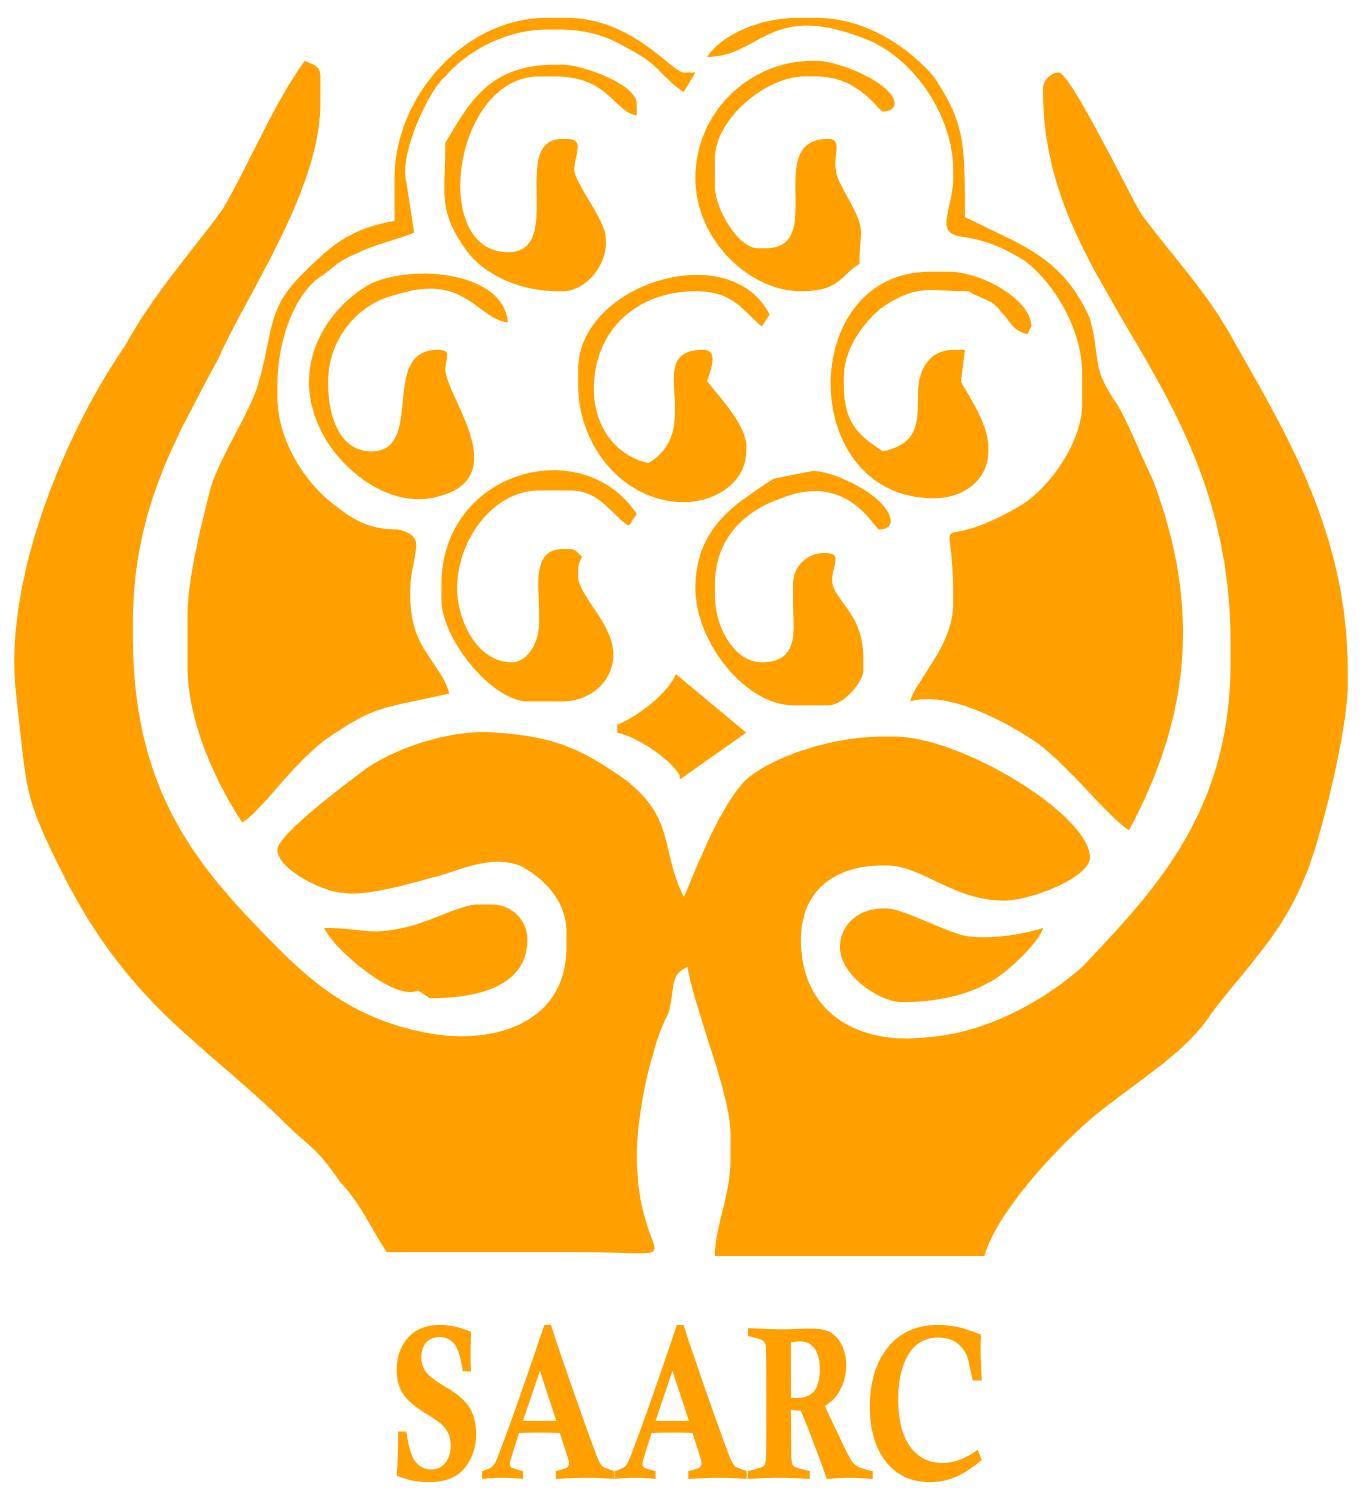 Safta Logo - Problems And Prospects Of SAARC Countries